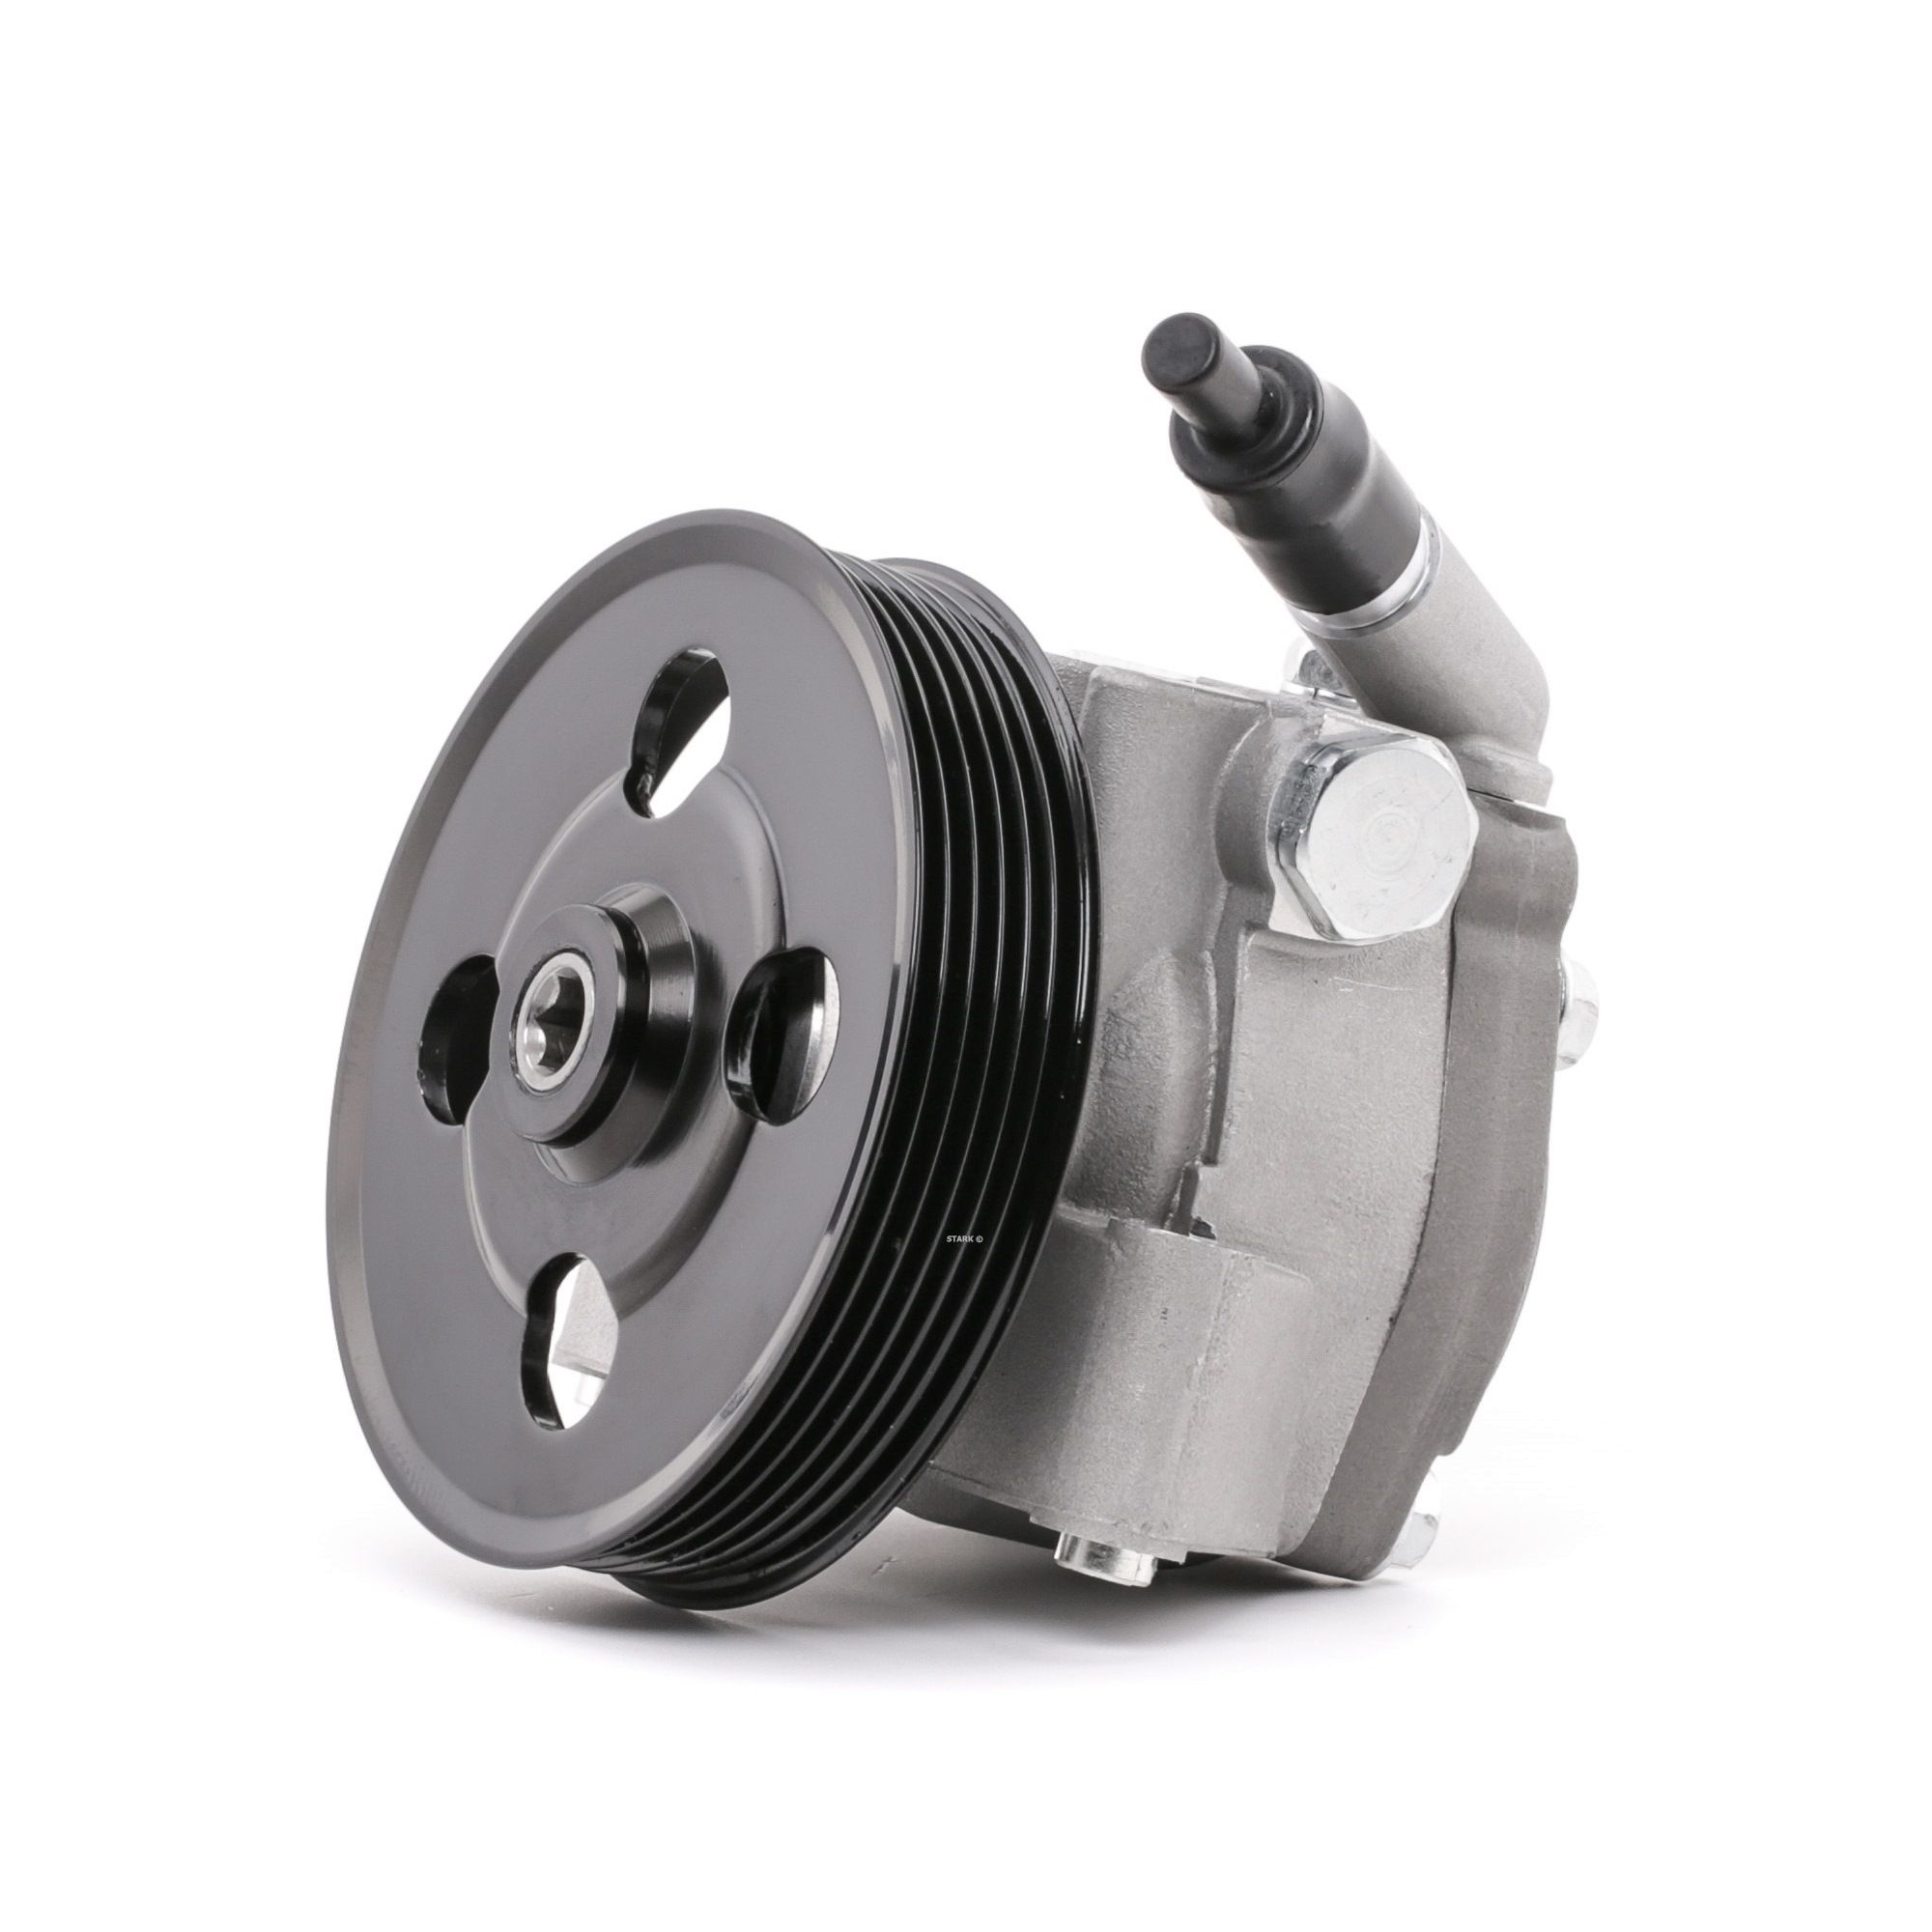 STARK SKHP-0540126 Power steering pump Hydraulic, 110 bar, Number of ribs: 6, Belt Pulley Ø: 122 mm, 80 l/h